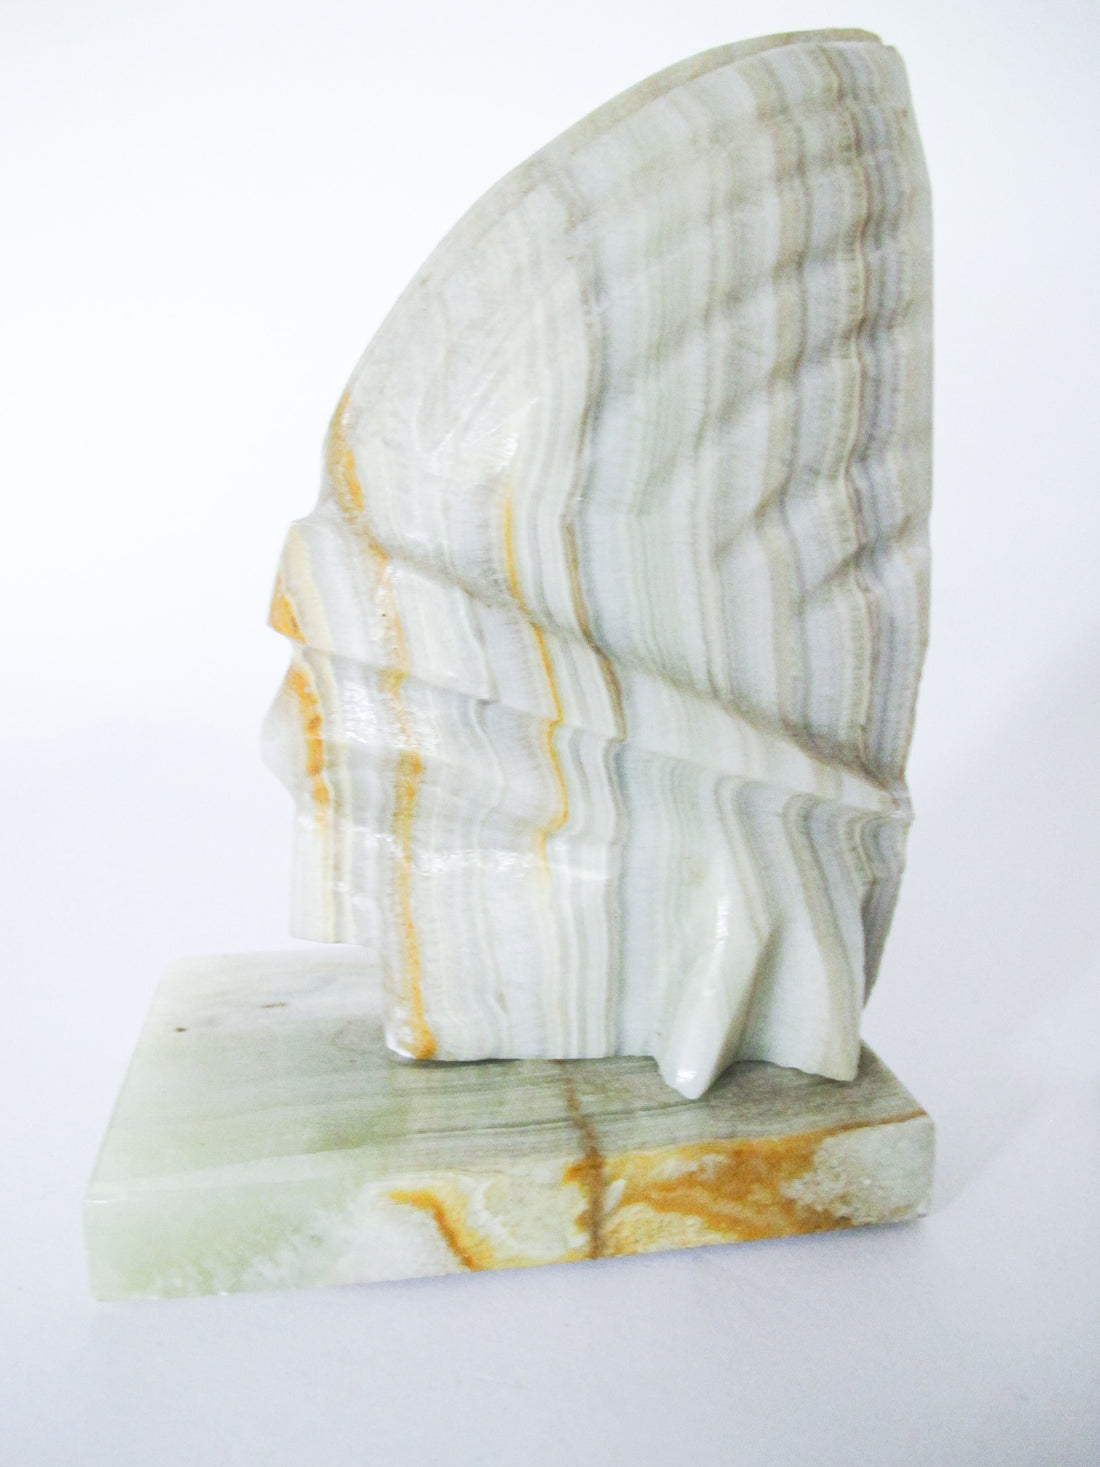 White Marble Onyx Native American Bookends